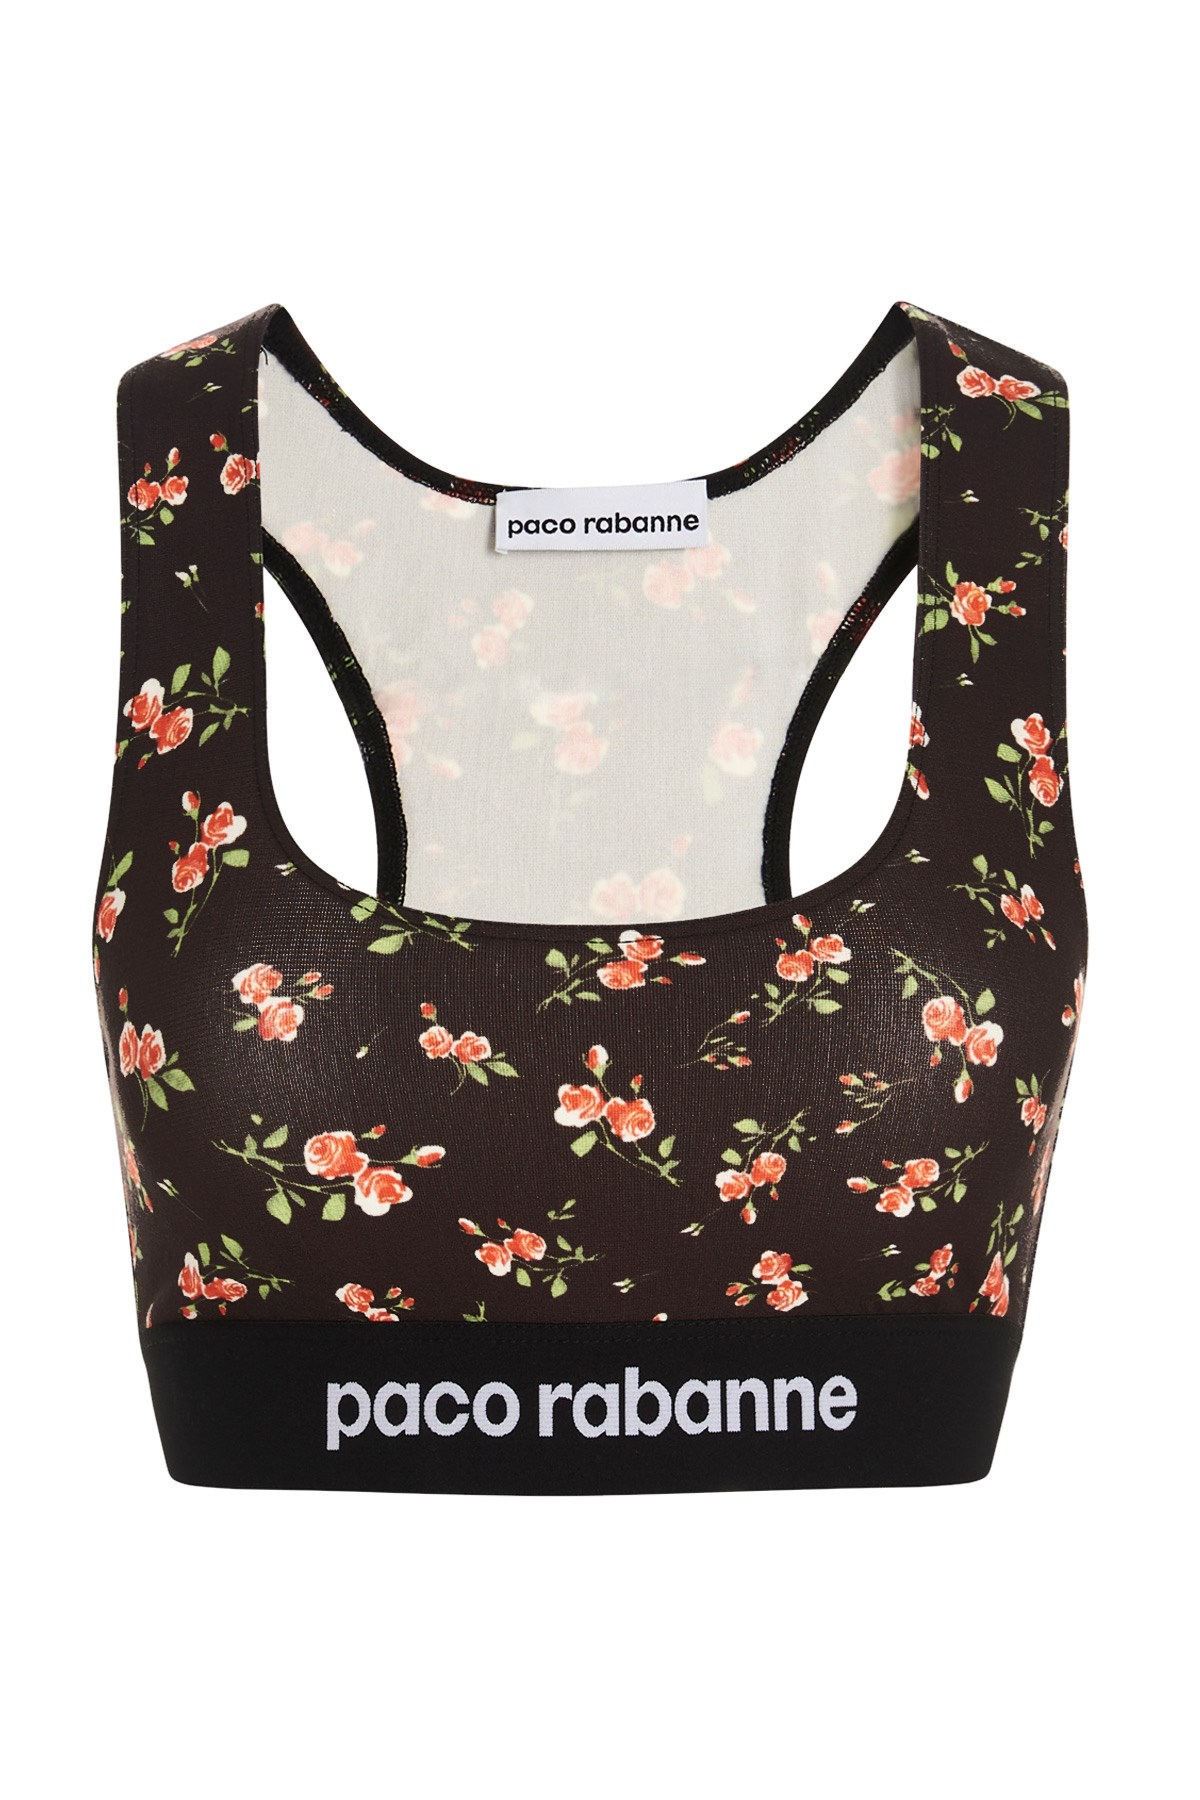 PACO RABANNE Floral Print Cropped Top